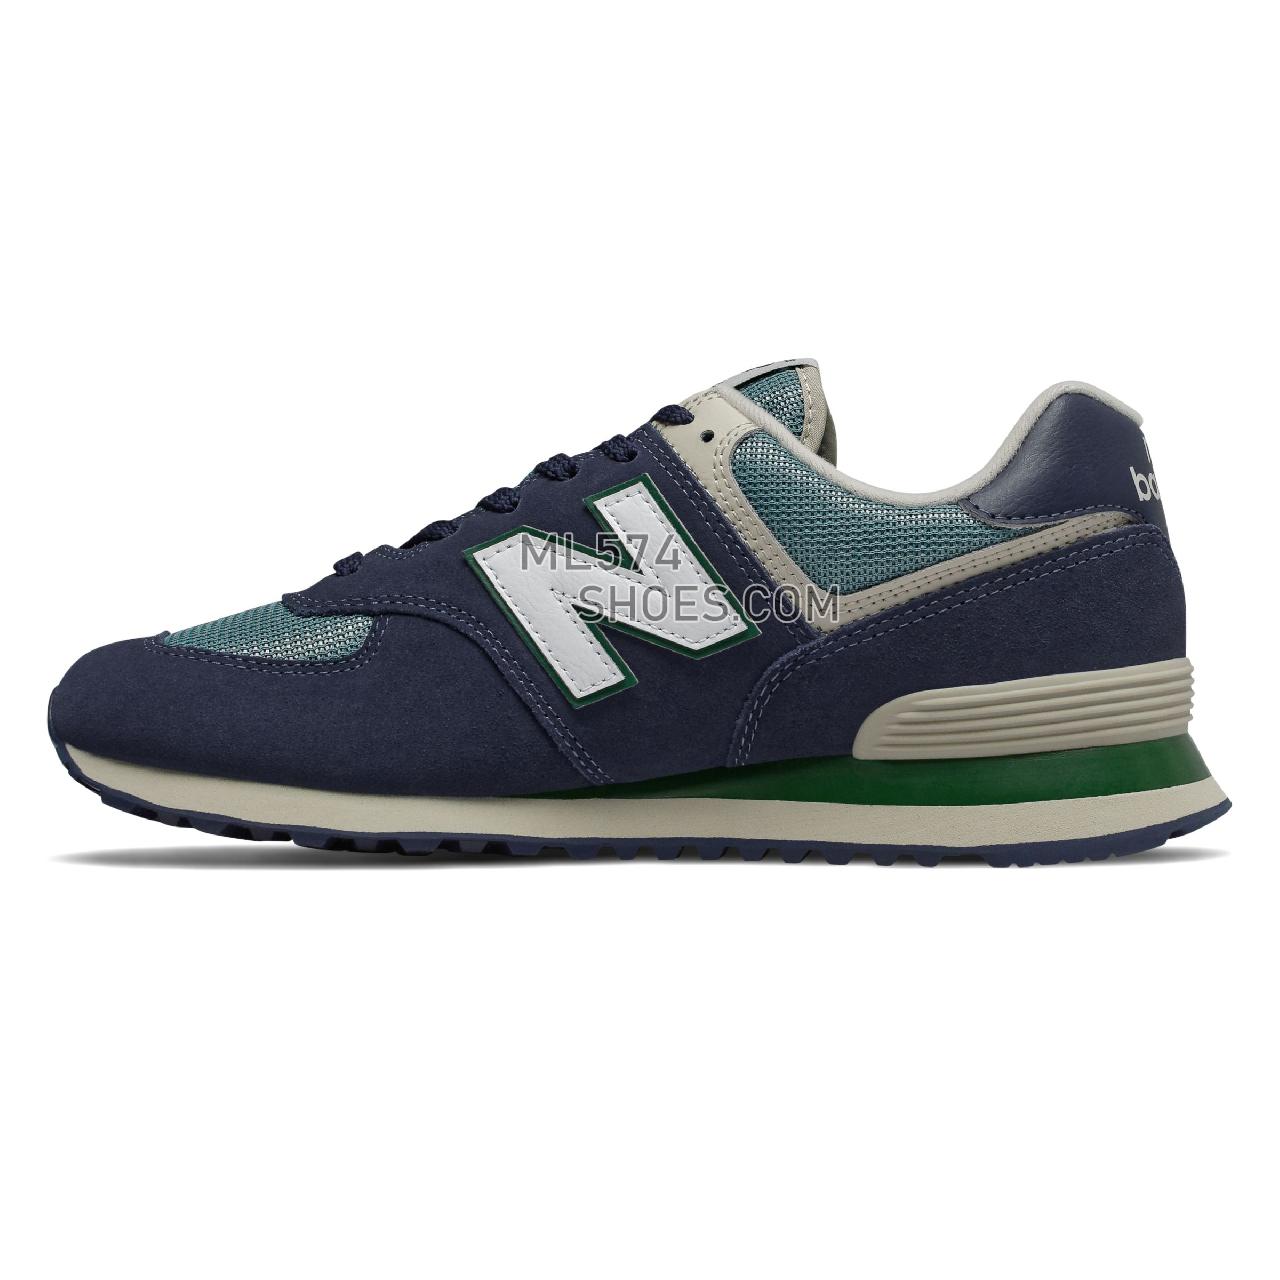 New Balance 574 - Men's Classic Sneakers - Pigment with Chambray - ML574ERK